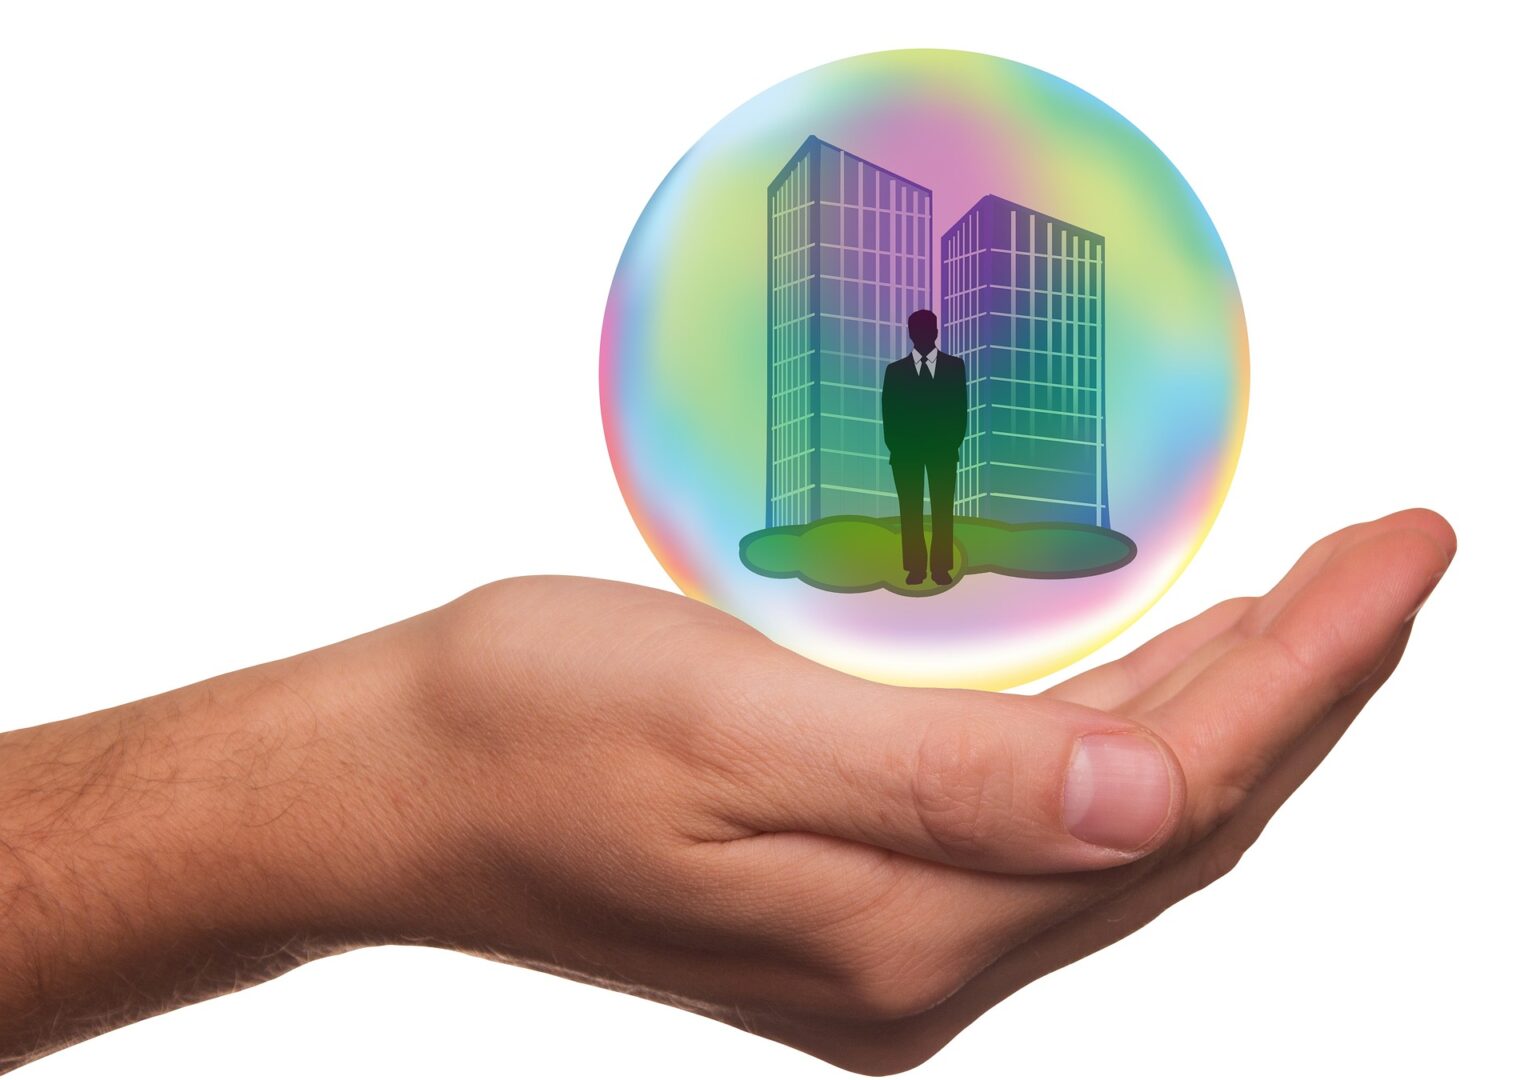 Hand holding bubble which is having image of a business man standing in front of buildings